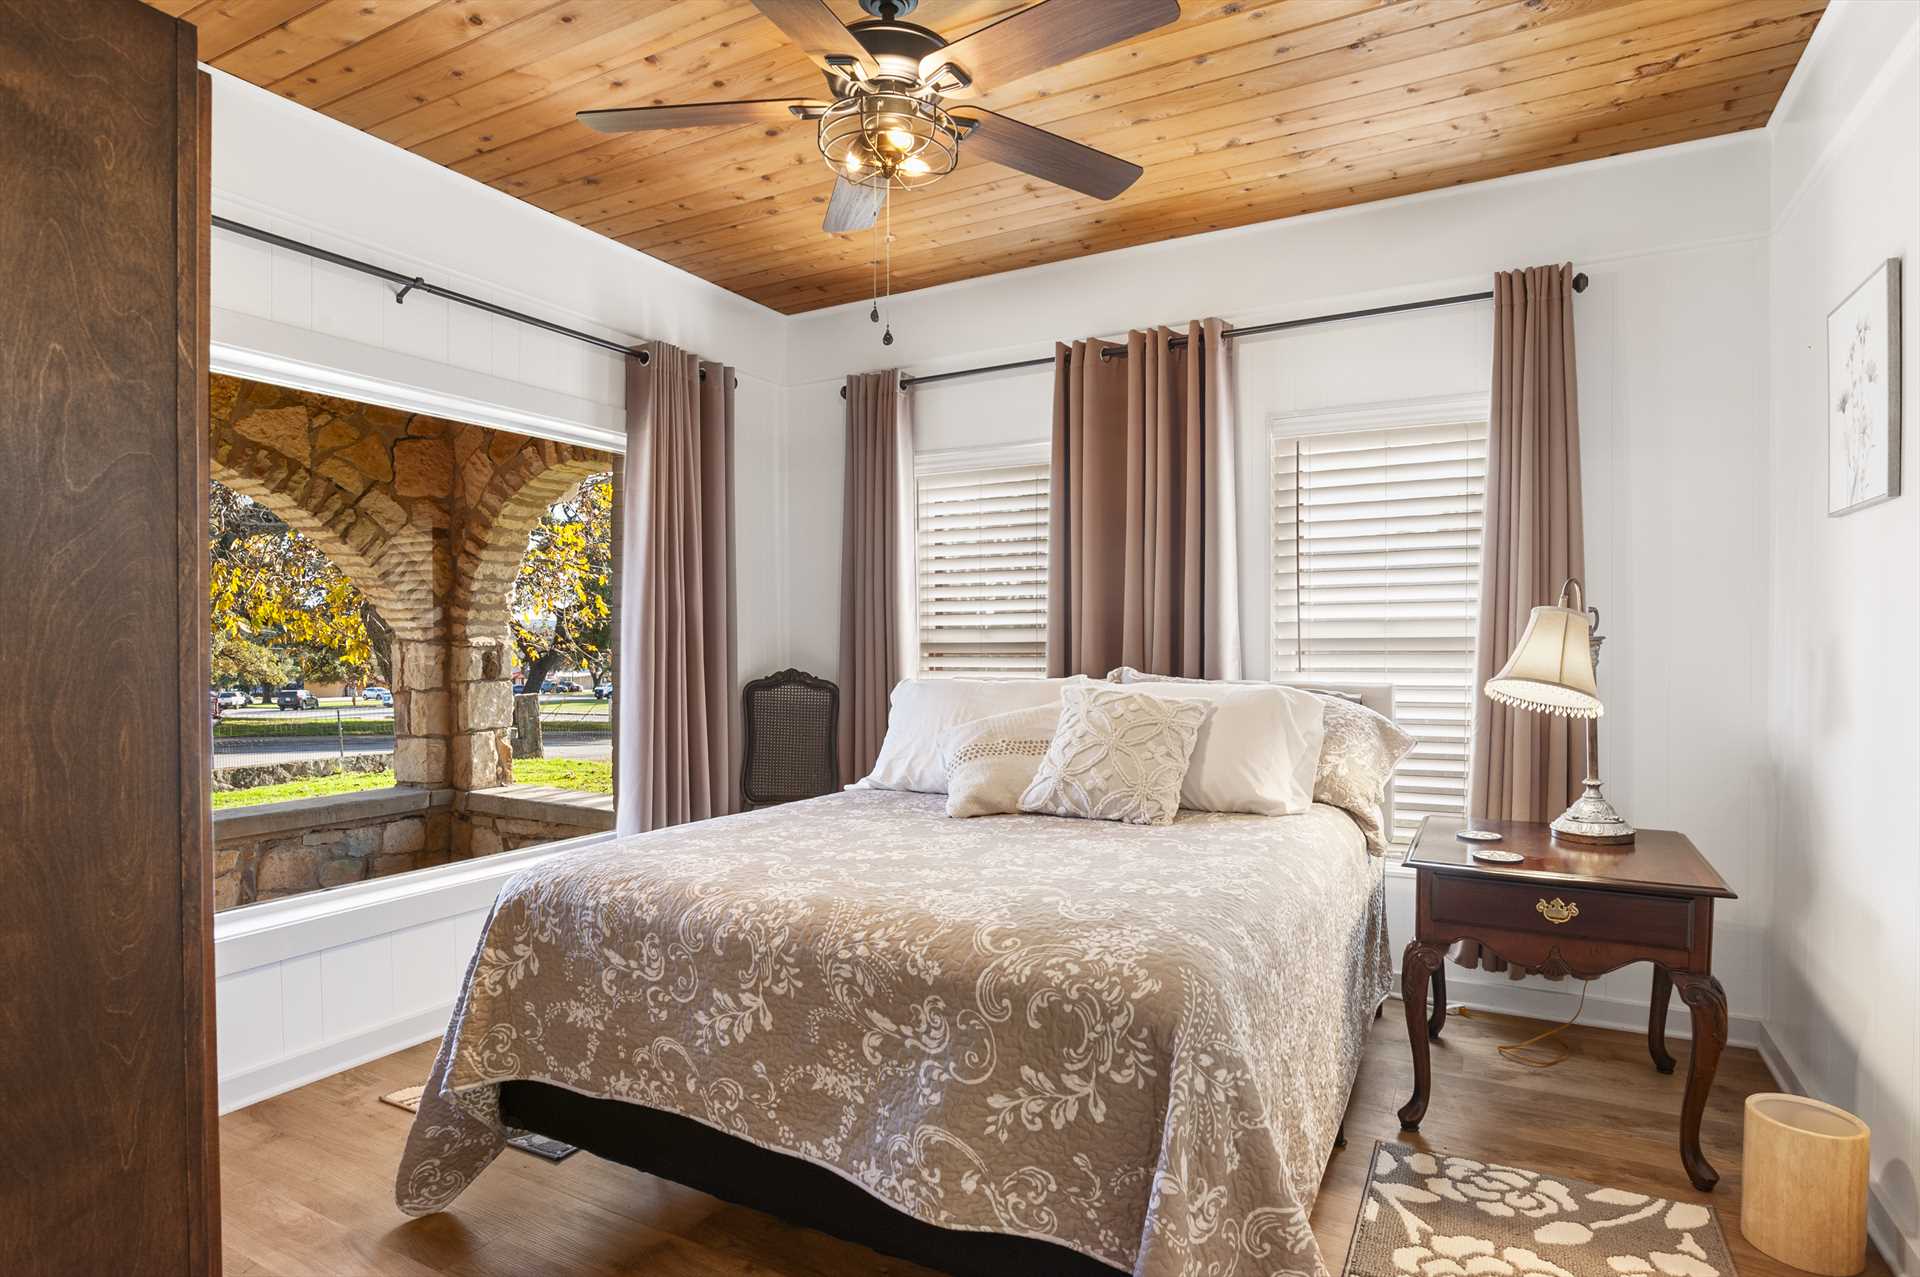                                                 Drift off to blissful slumber on the queen-sized bed in the second bedroom, and wake up to plenty of natural light!